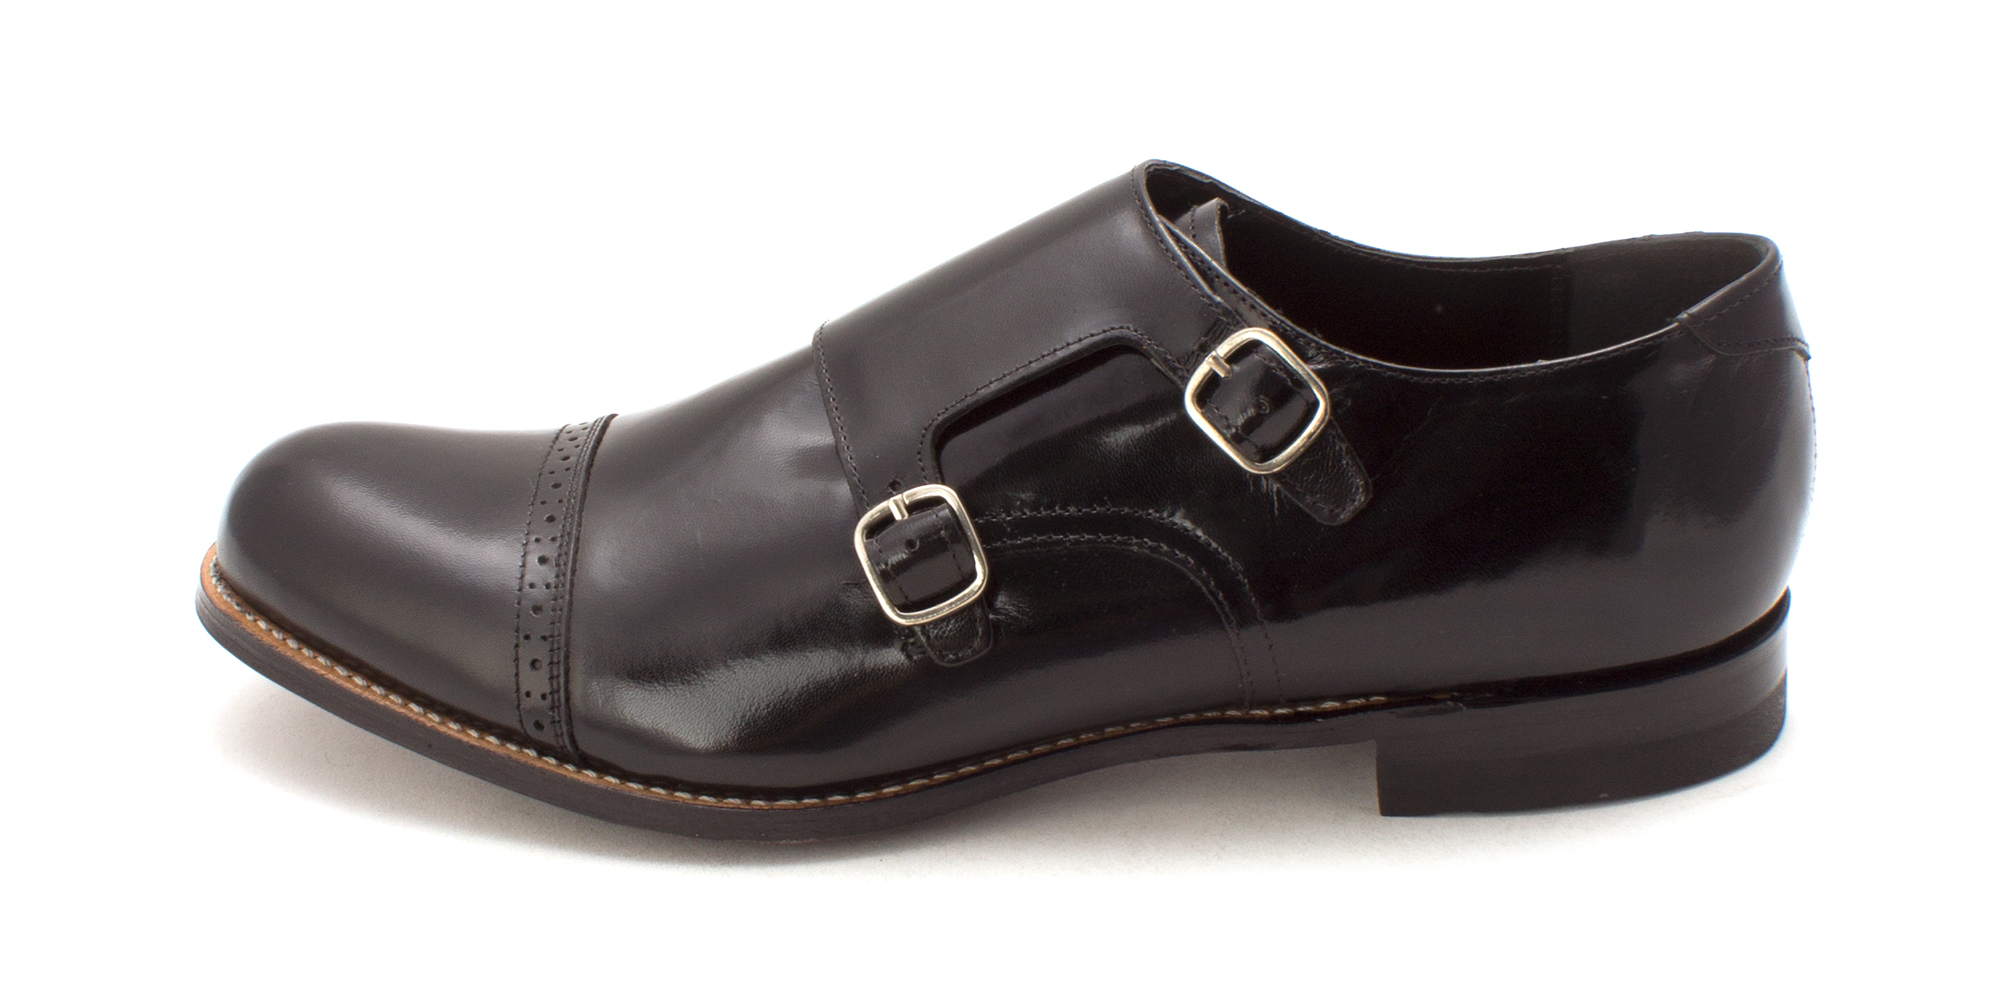 Stacy Adams Mens madison Leather Buckle Dress Oxfords, Black, Size 11.5